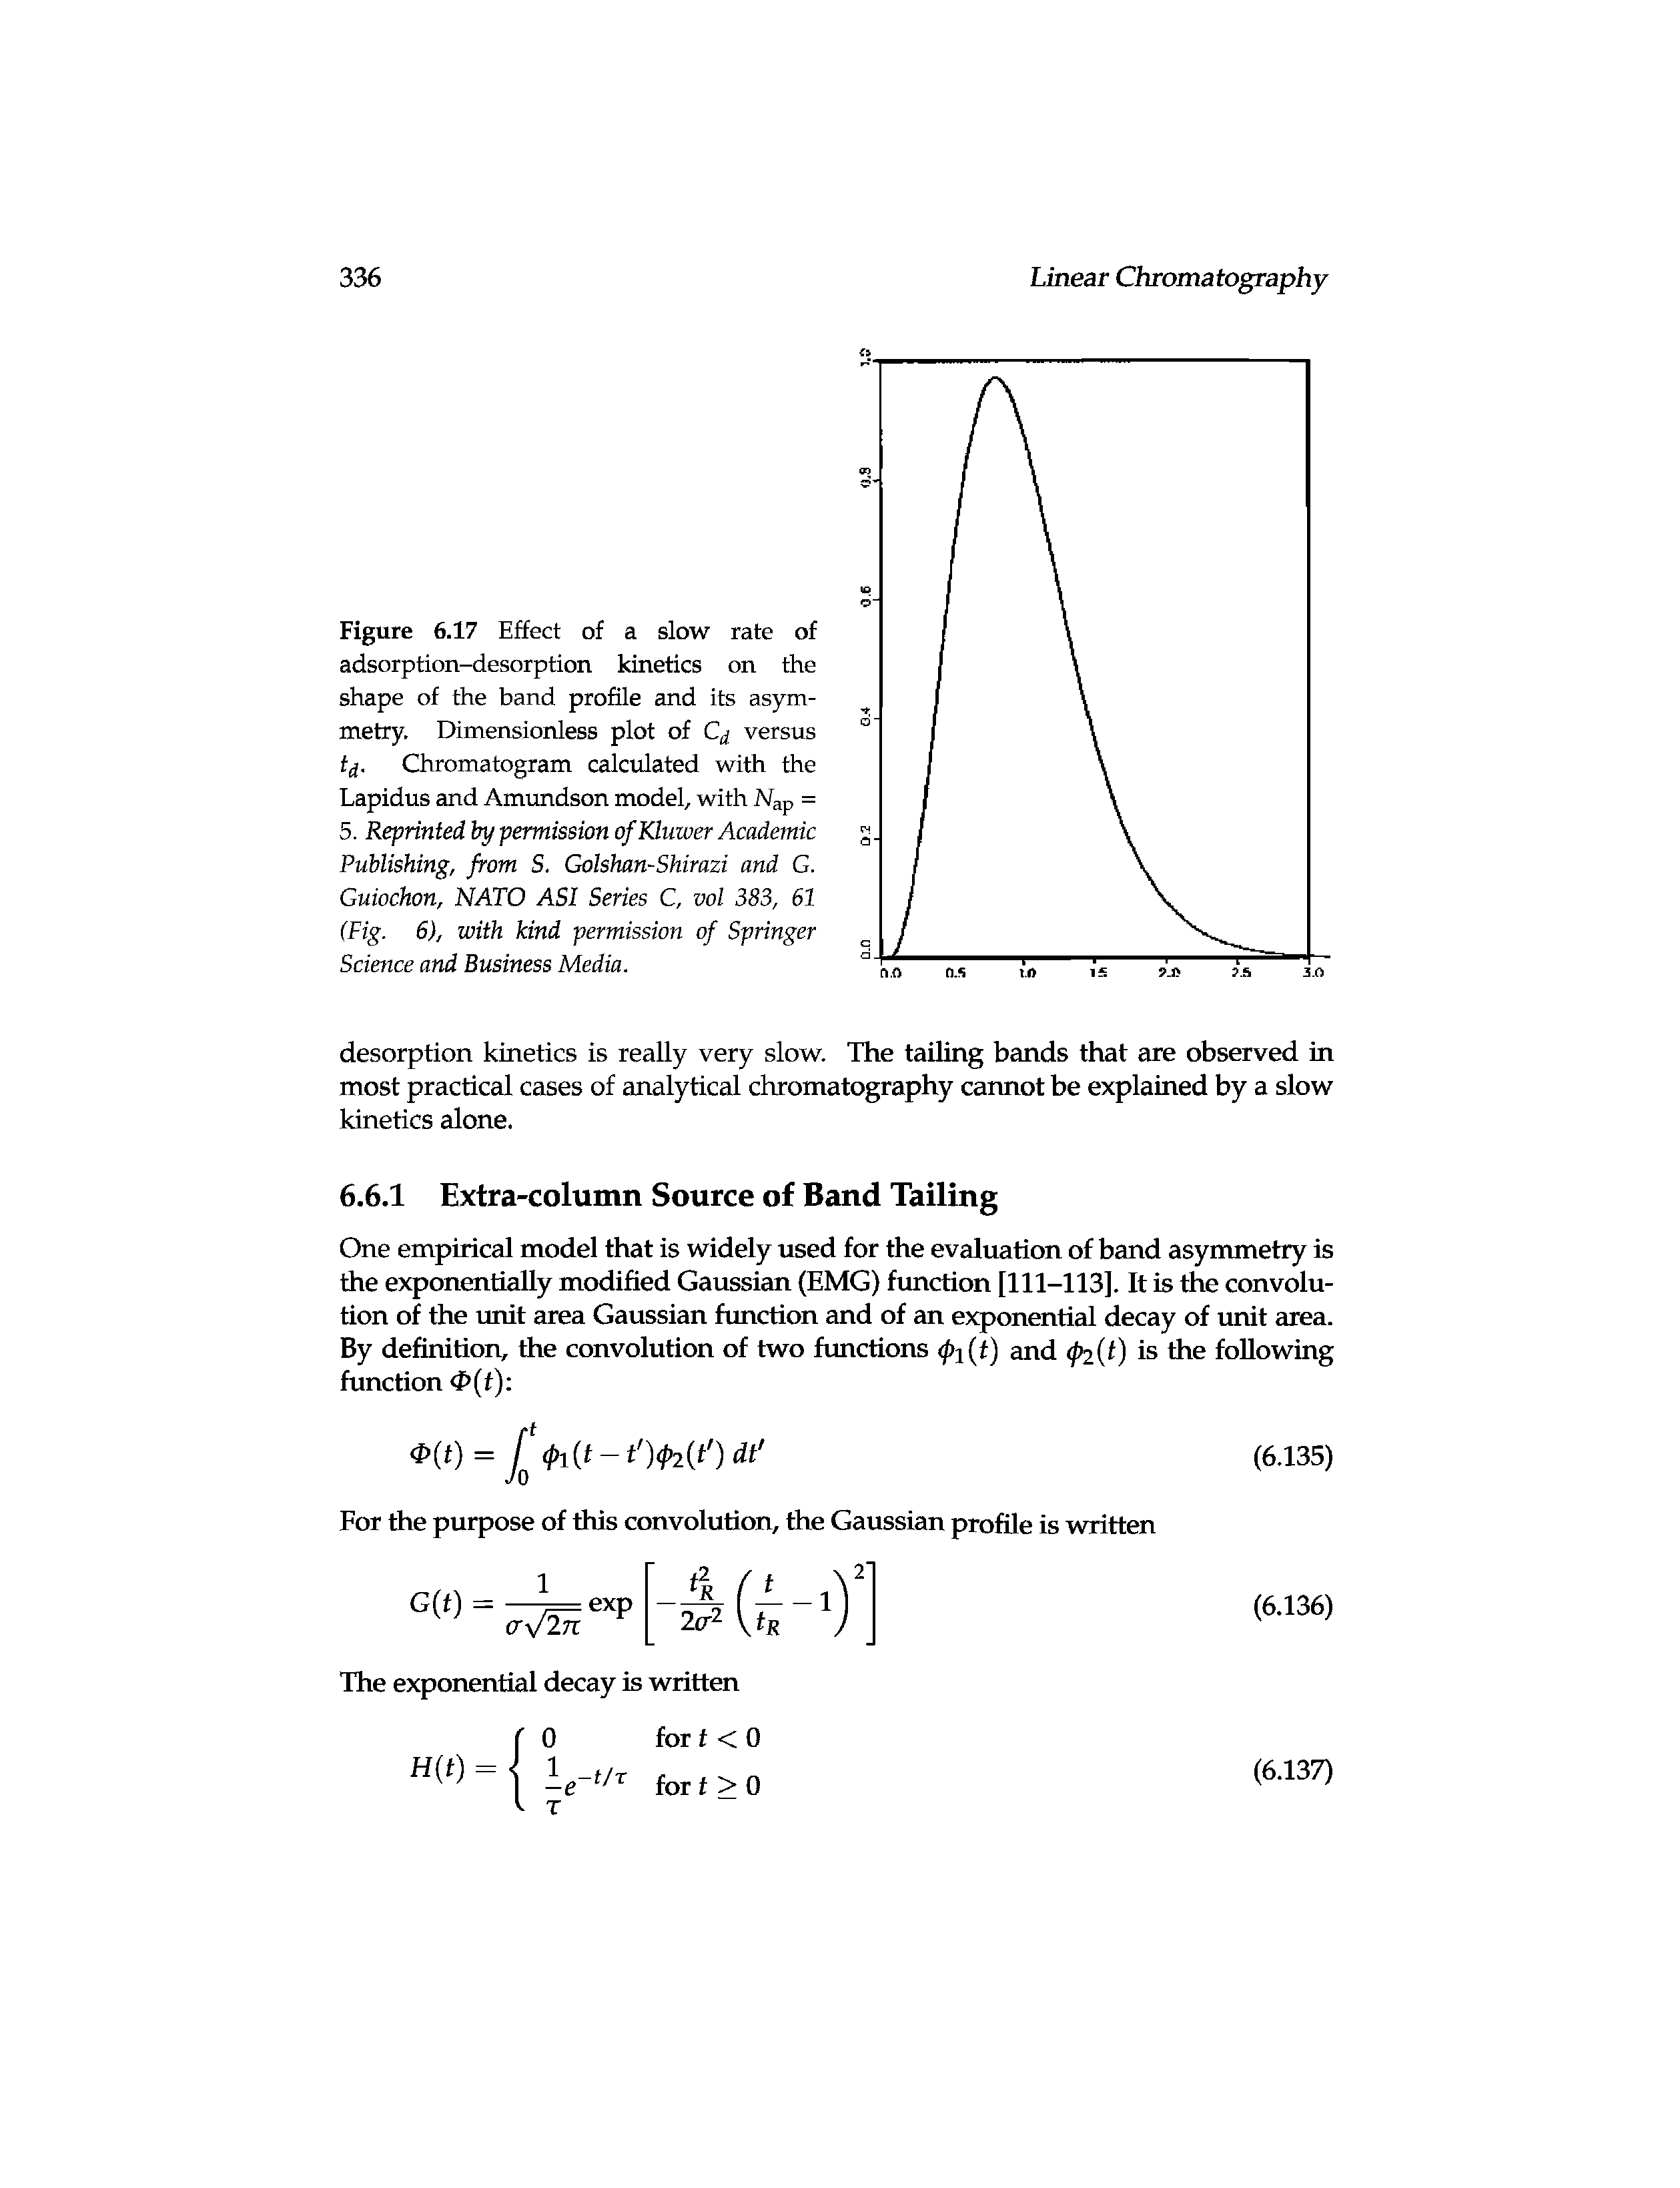 Figure 6.17 Effect of a slow rate of adsorption-desorption kinetics on the shape of the band profile and its asymmetry. Dimensionless plot of Q versus frf. Chromatogram calculated with the Lapidus and Amundson model, with Nap = 5. Reprinted by permission of Kluwer Academic Publishing, from S. Golshan-Shirazi and G. Guiochon, NATO ASl Series C, vol 383, 61 (Fig. 6), with kind permission of Springer Science and Business Media.